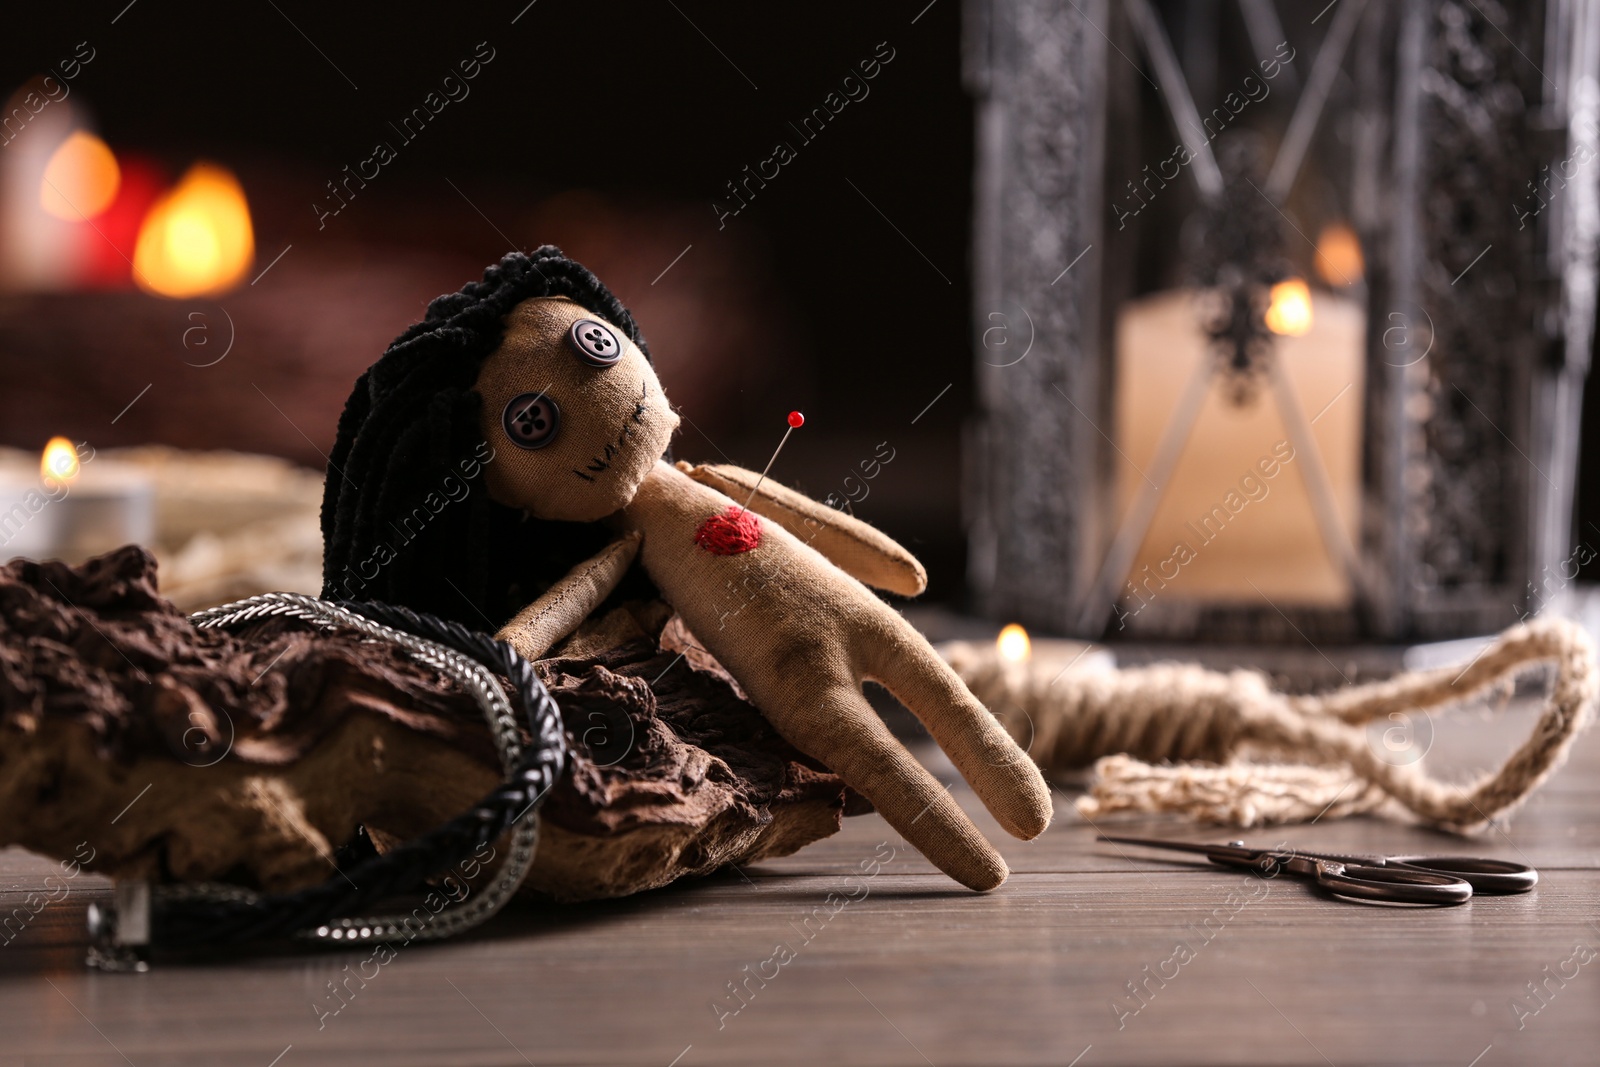 Photo of Female voodoo doll with pin in heart and ceremonial items on wooden table